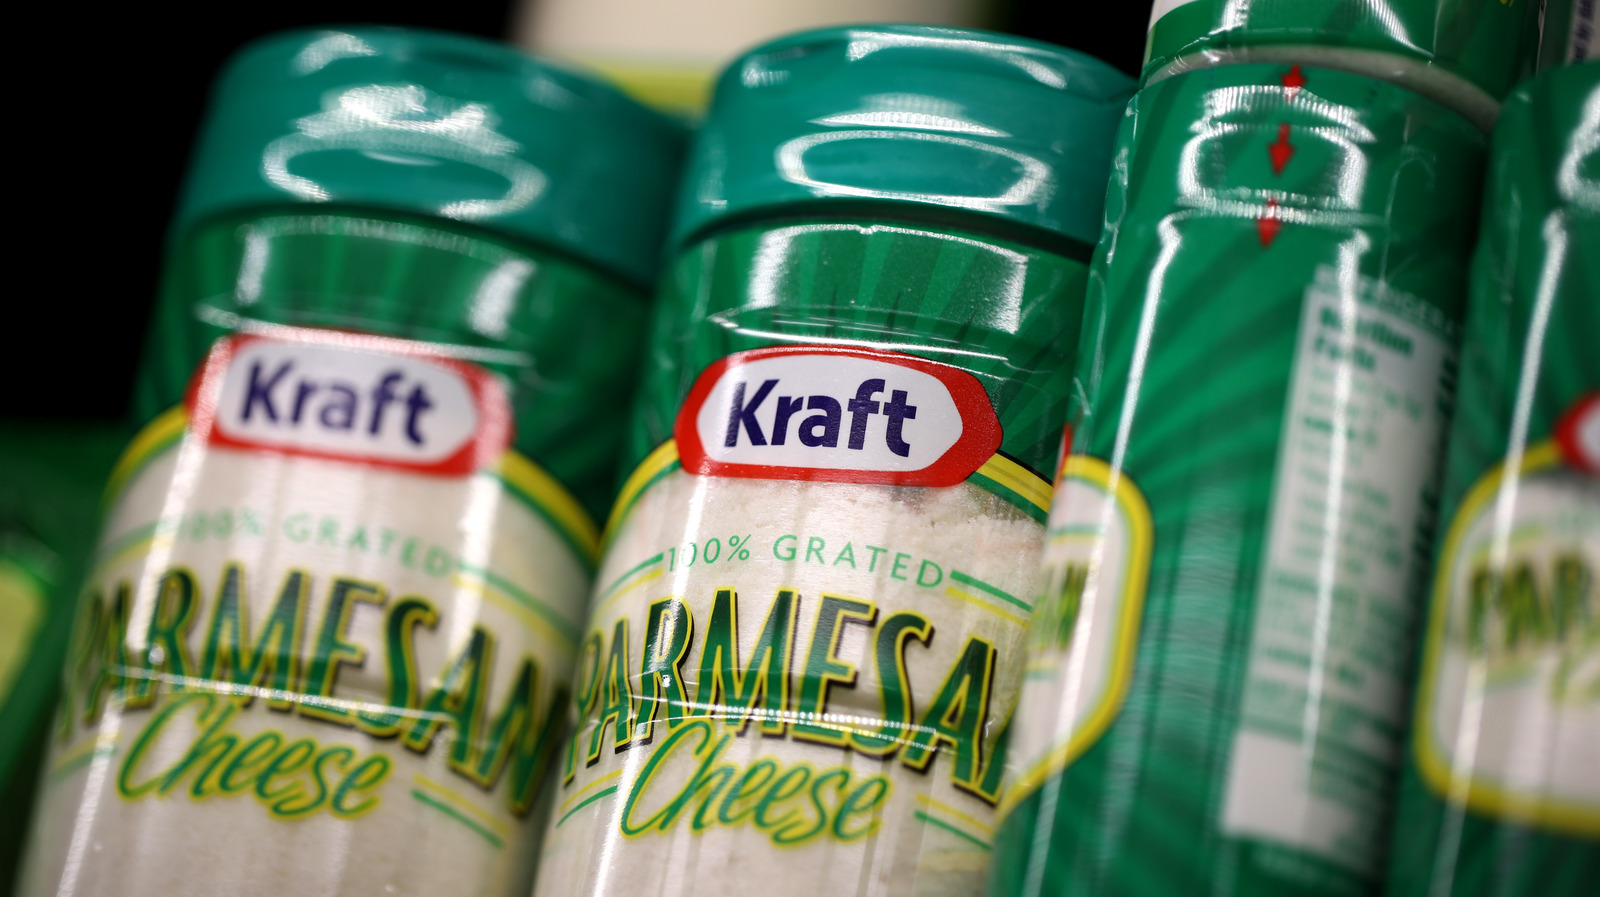 Kraft Parmesan Cheese brand in plastic shaker container. Prepared News  Photo - Getty Images